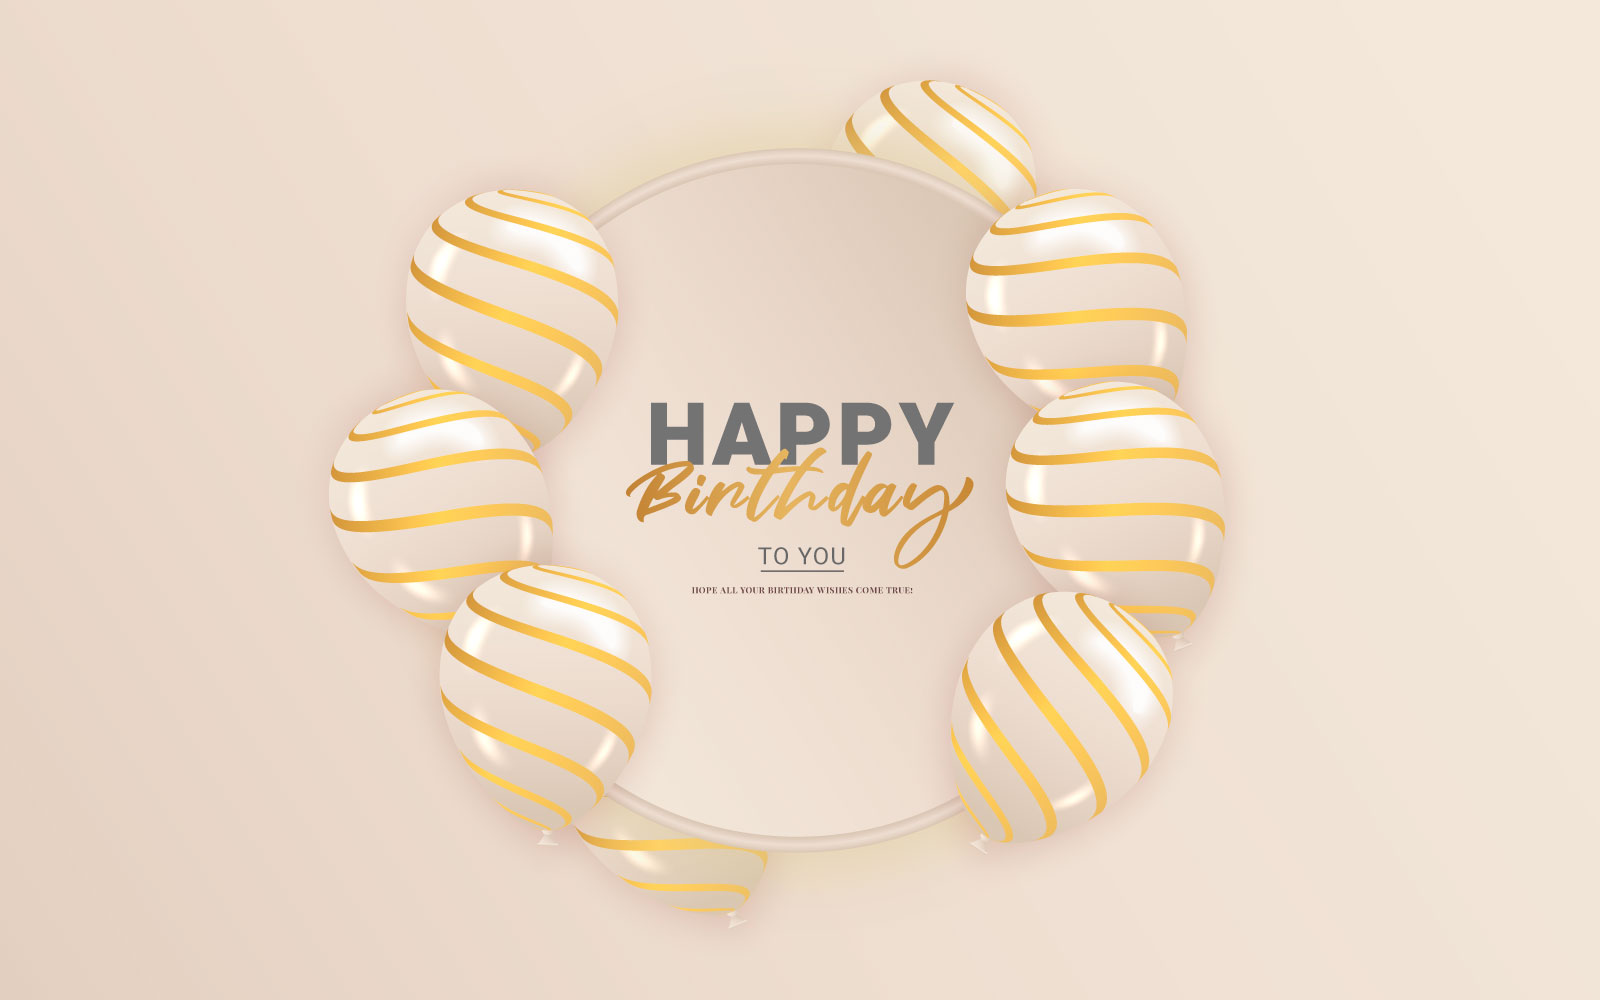 Happy birthday congratulations banner design with  balloons and   party holiday  style